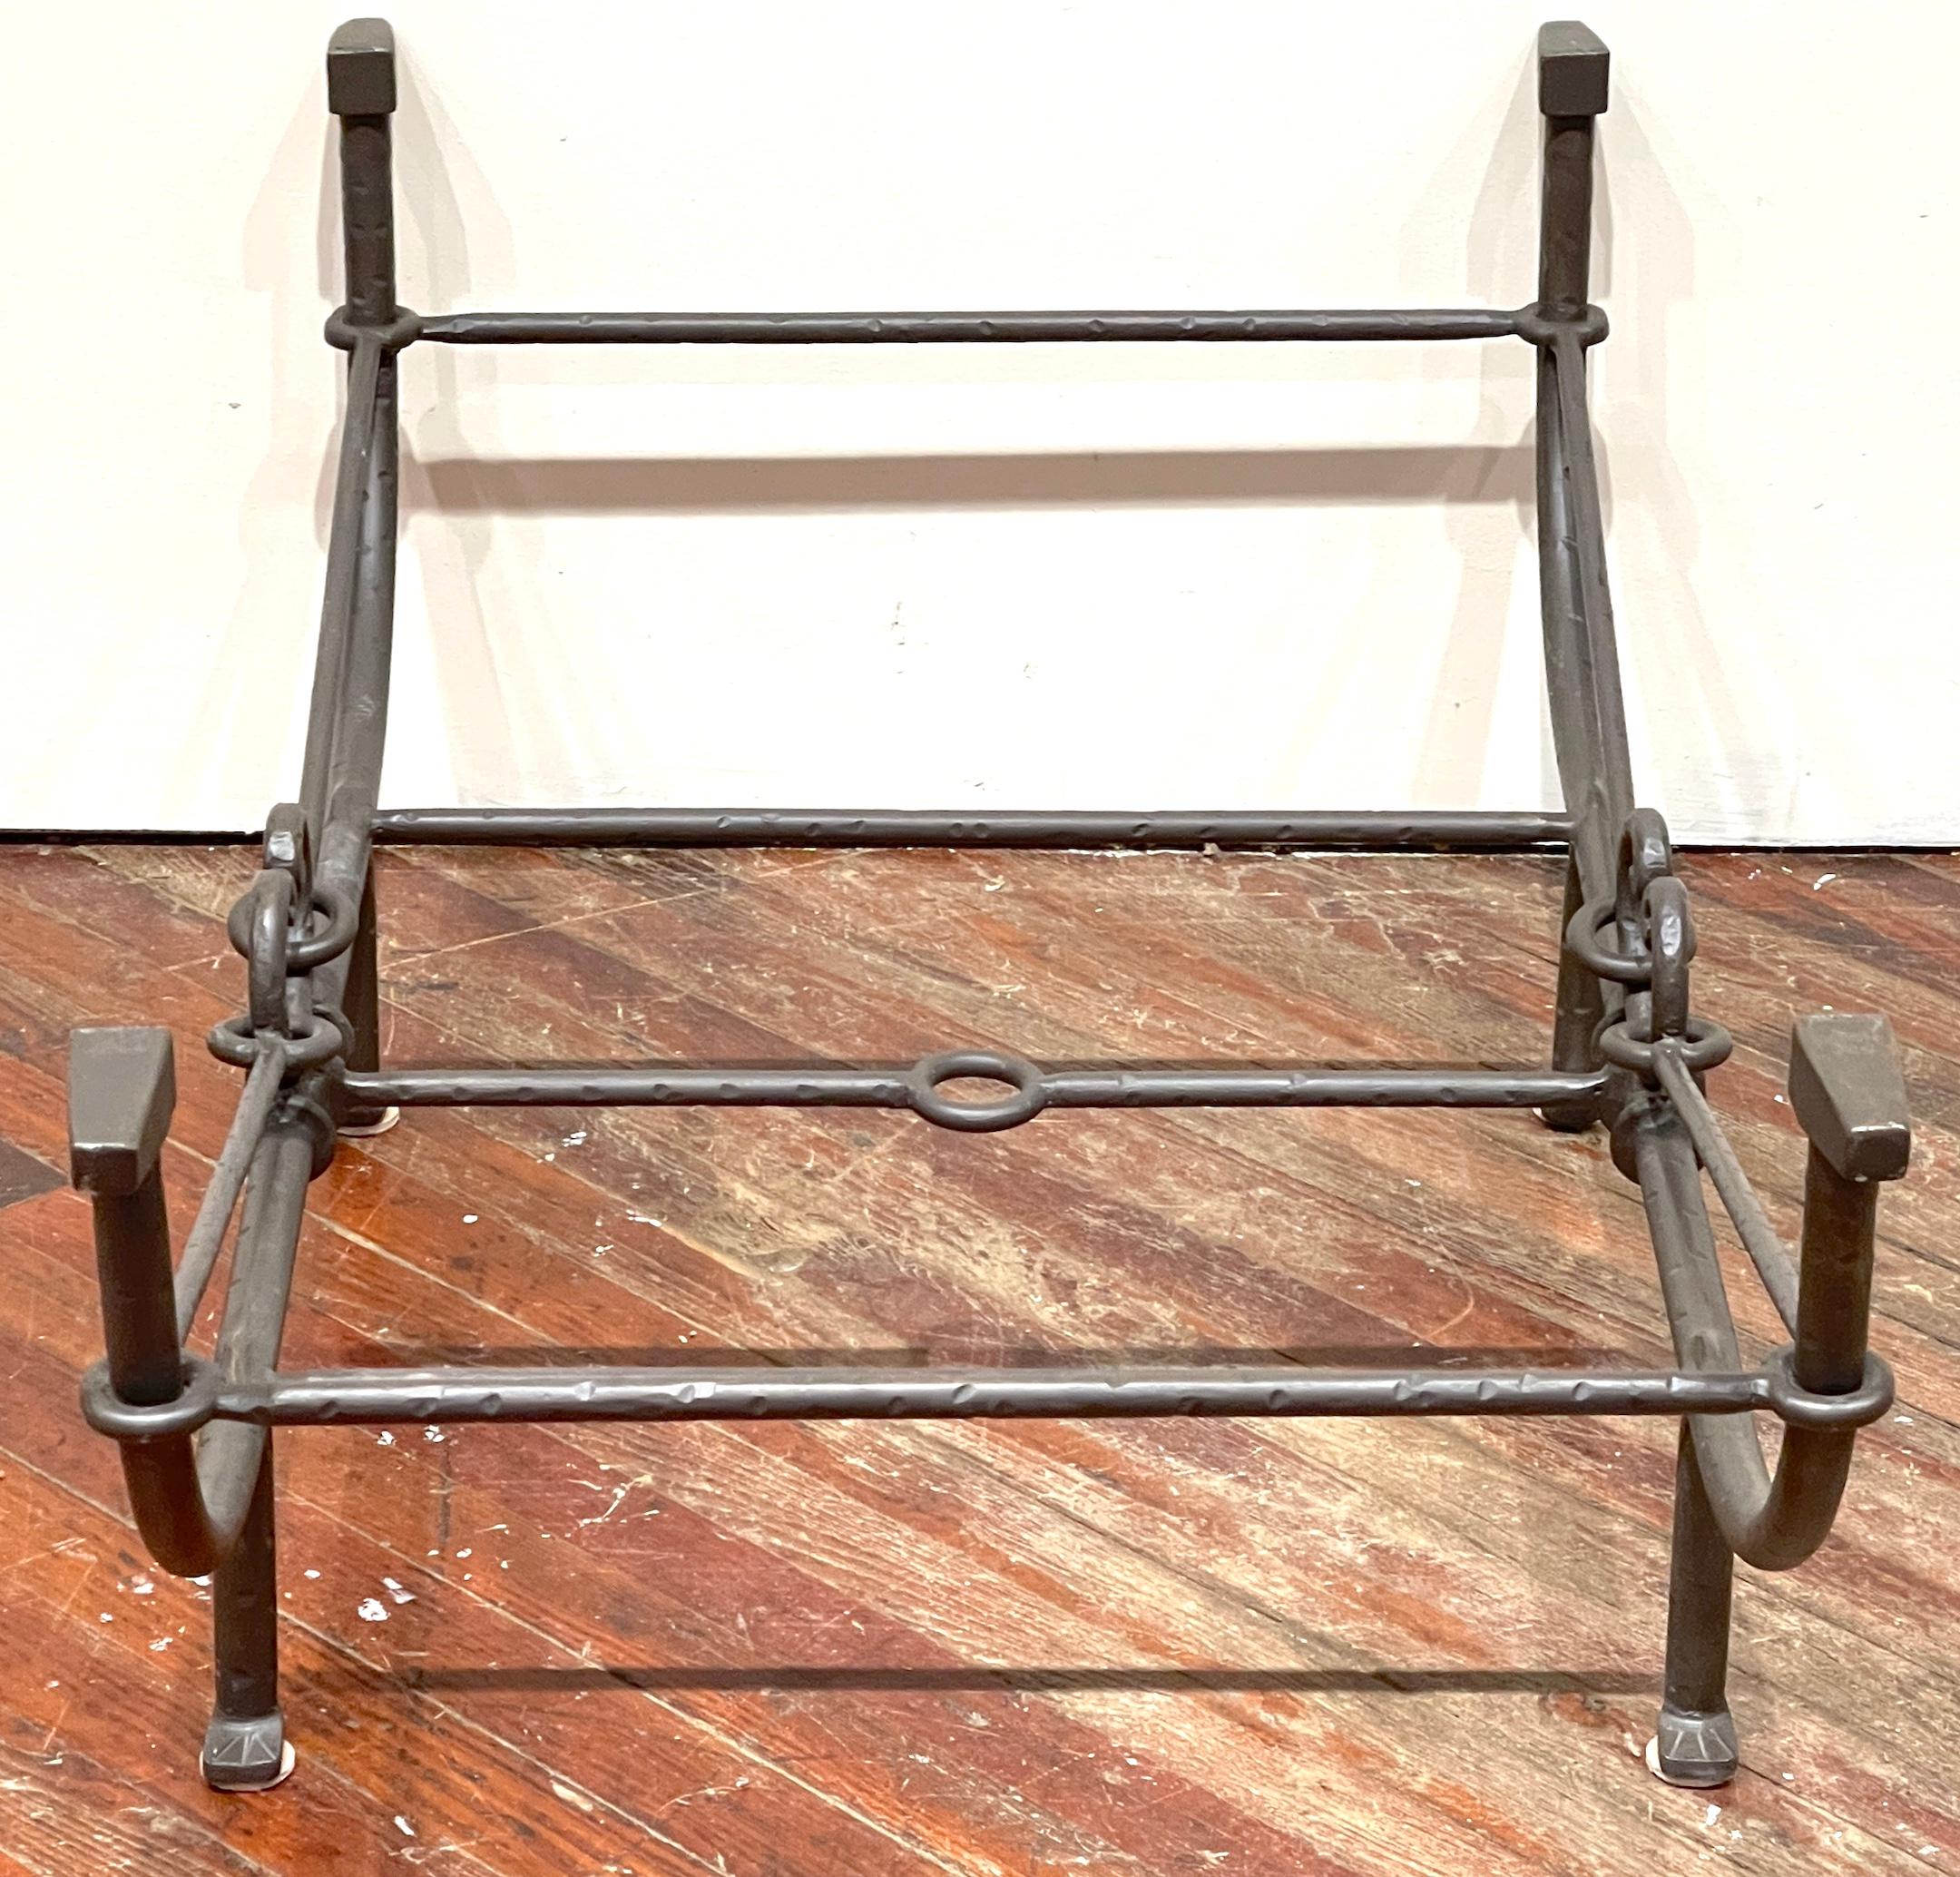 Forged Paul Ferrante Sculptural Iron Coffee Table Base, Style of Giacometti  For Sale